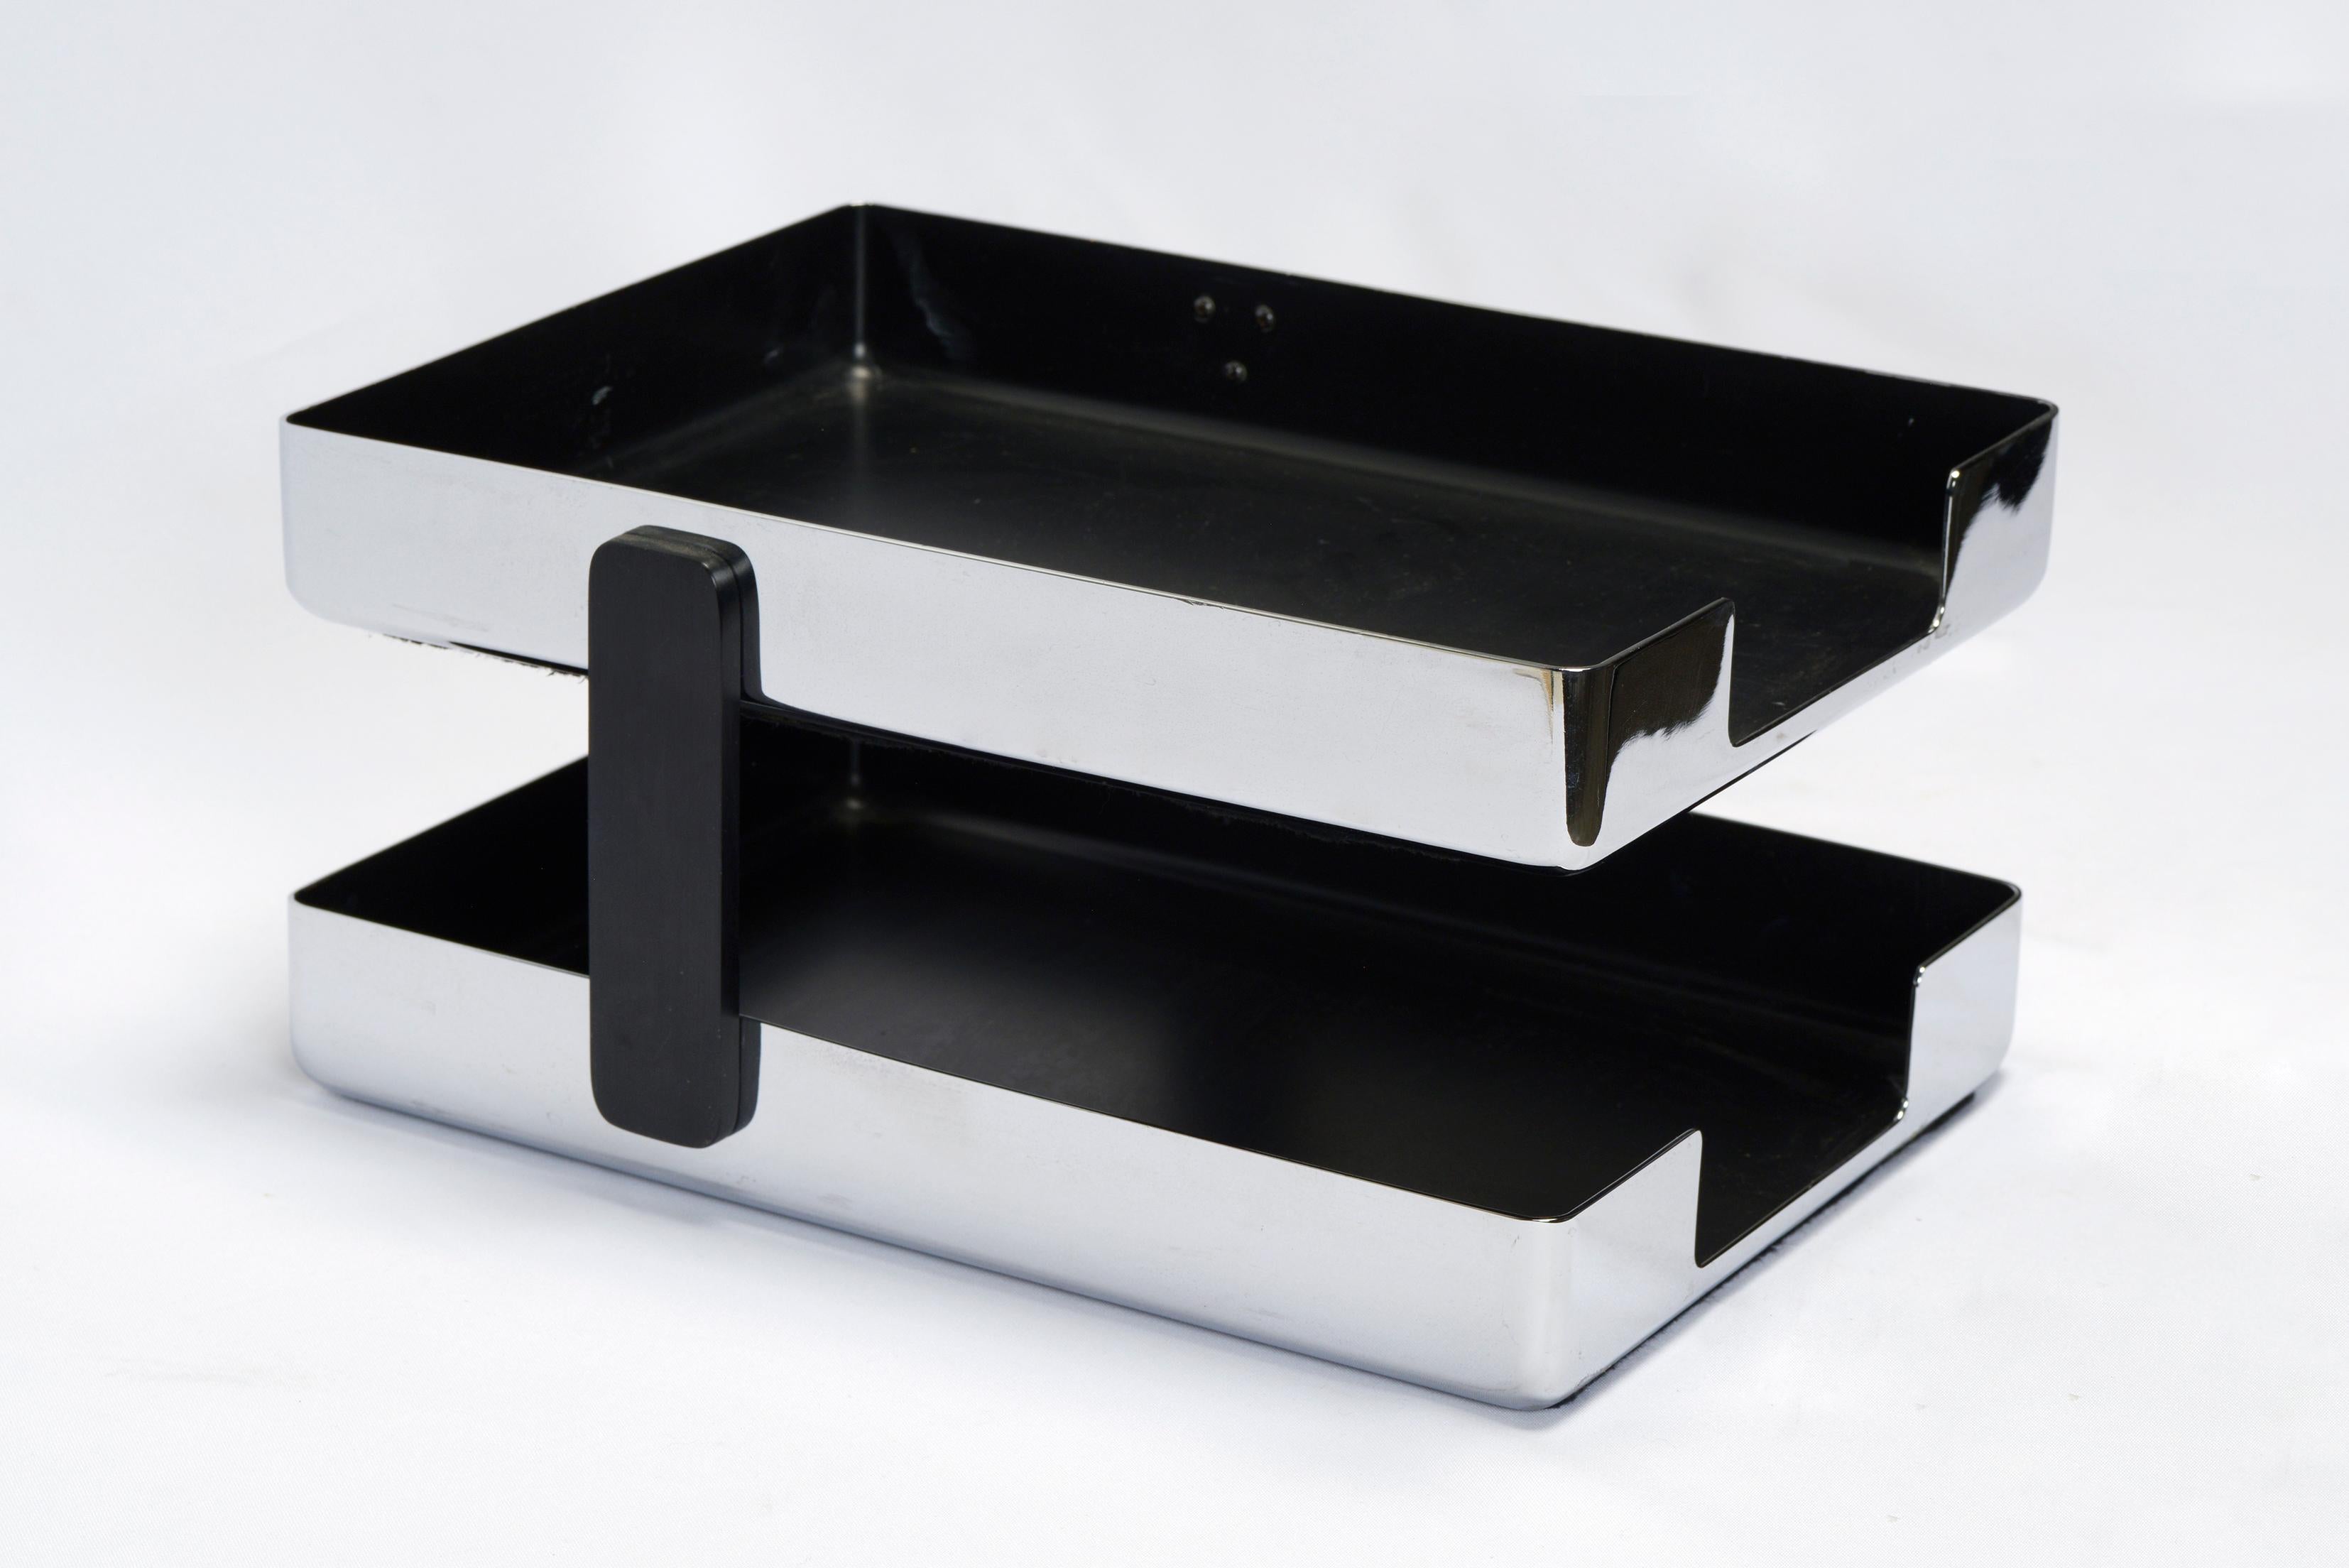 American 1970s Modern Chrome Desk Tray, Two-Tiers by Metcor Los Angeles